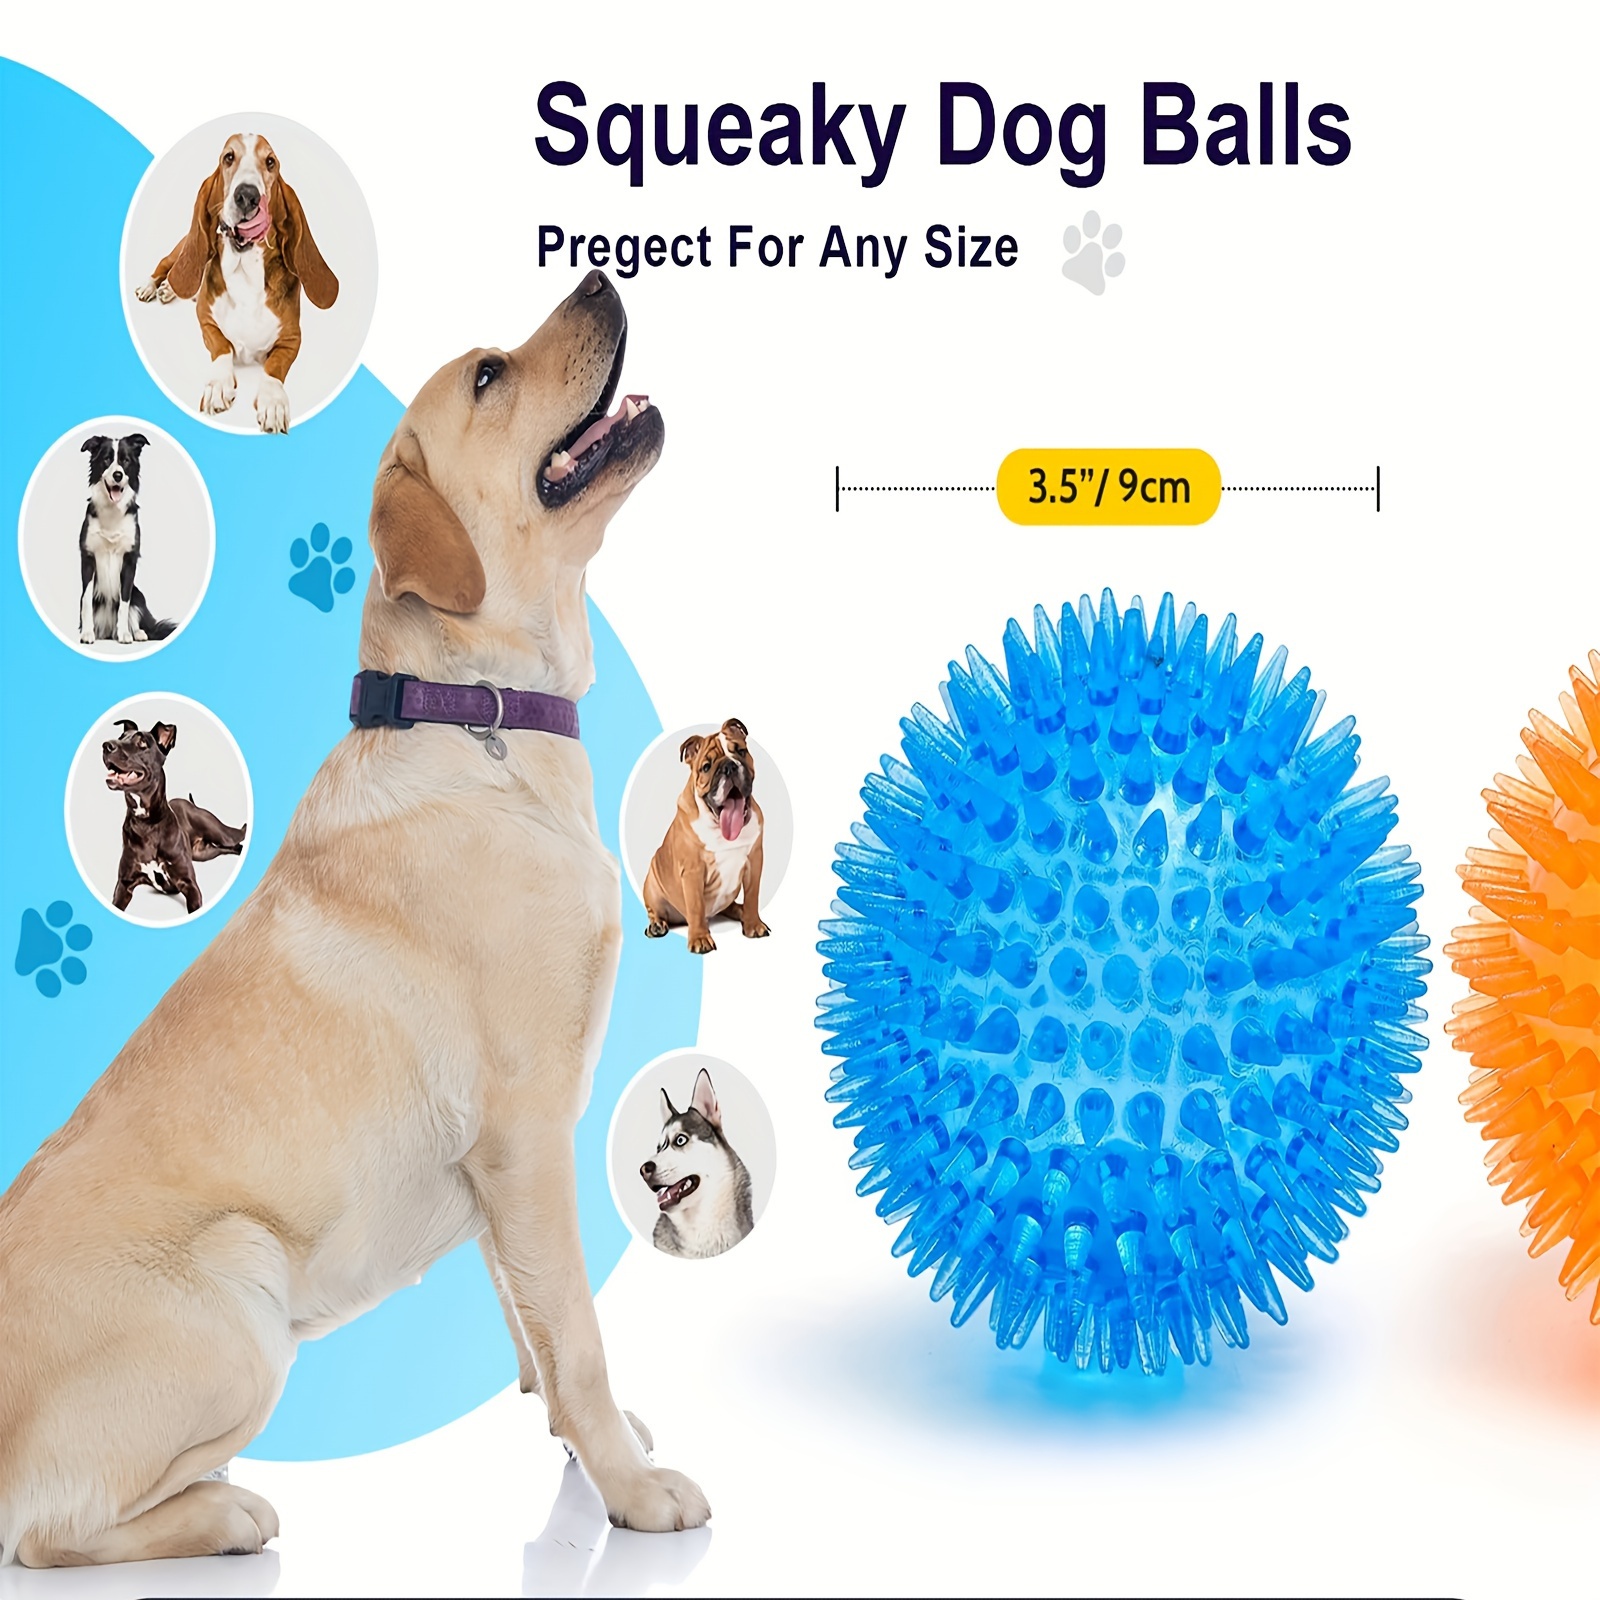 

Squeaky Spiky Dog Balls - Durable Interactive For Teeth Cleaning, Non-toxic Rubber Material, Suitable For Small Breeds, Floats On Water, No Battery Needed